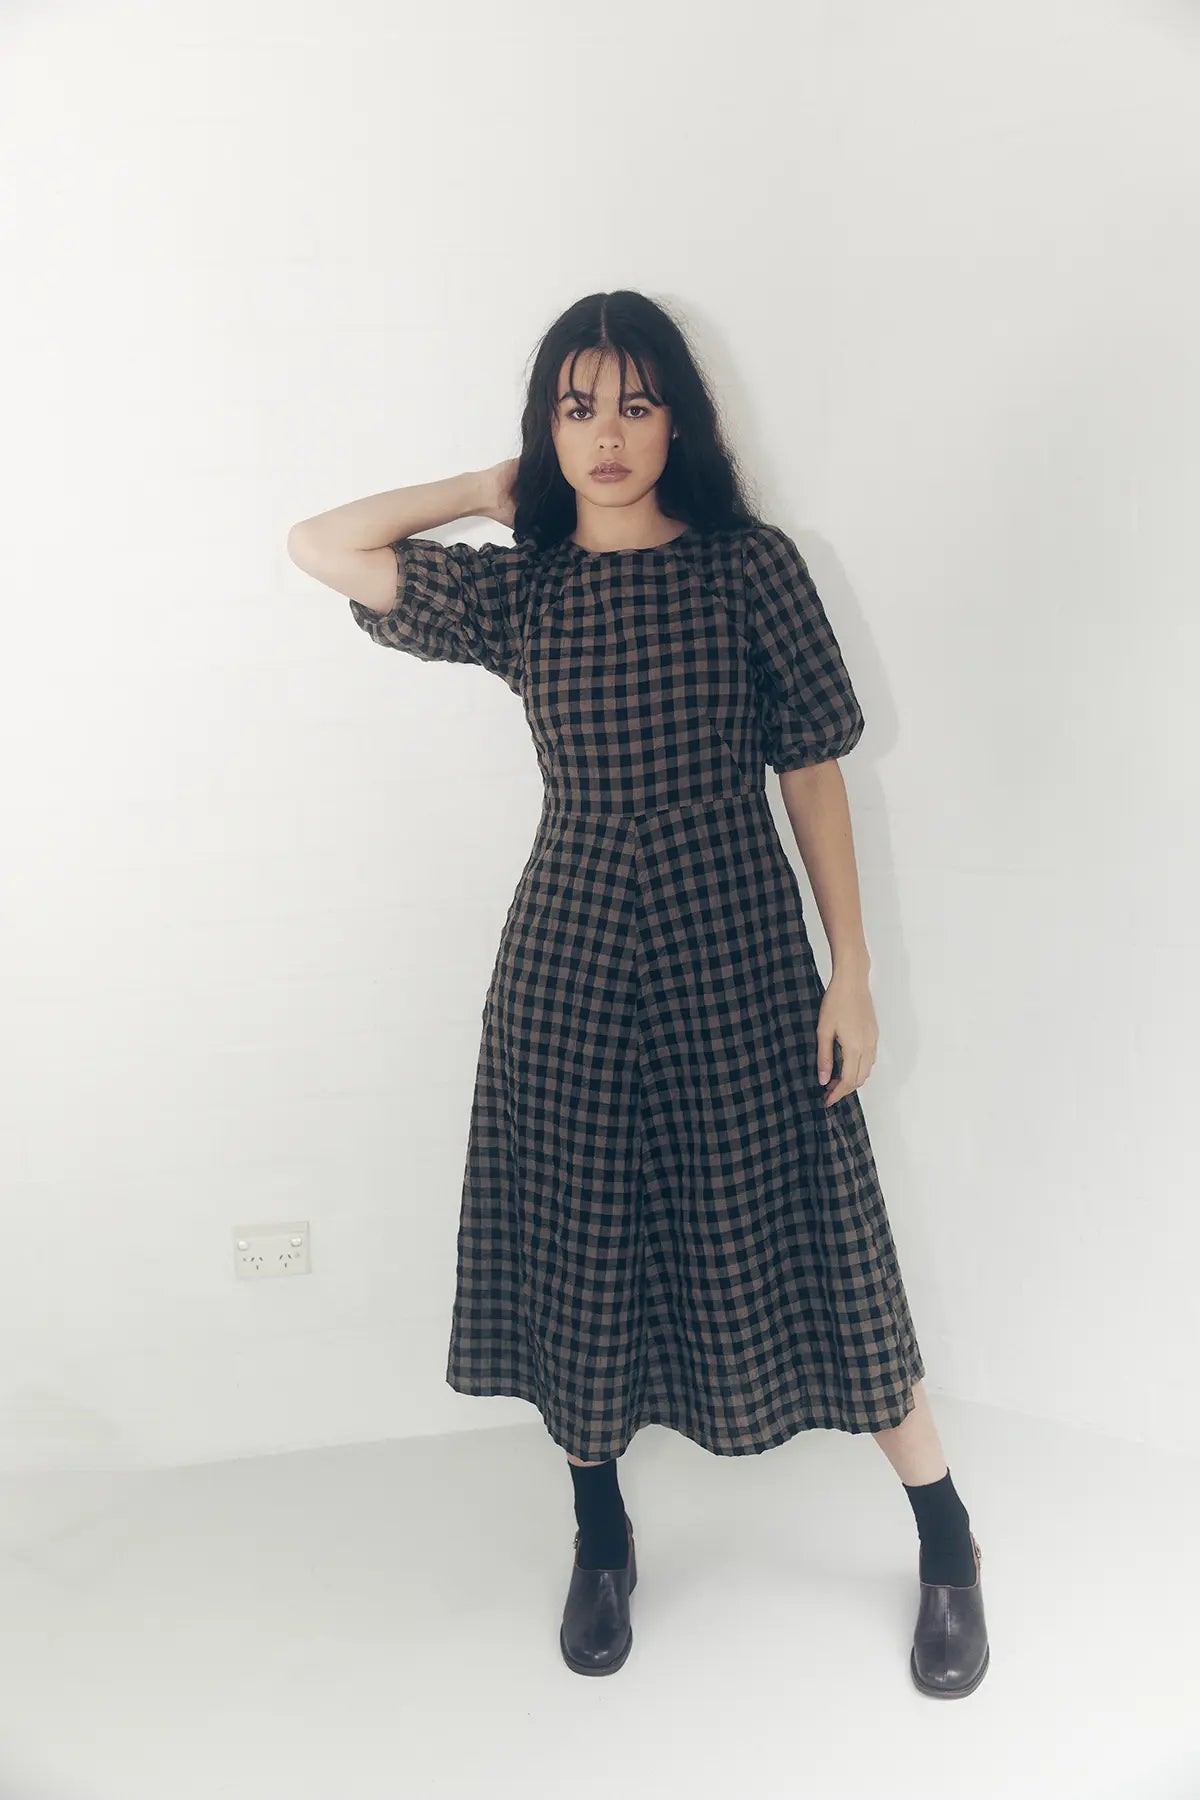 model standing hand on head in a line gingham dress colour mocha and black